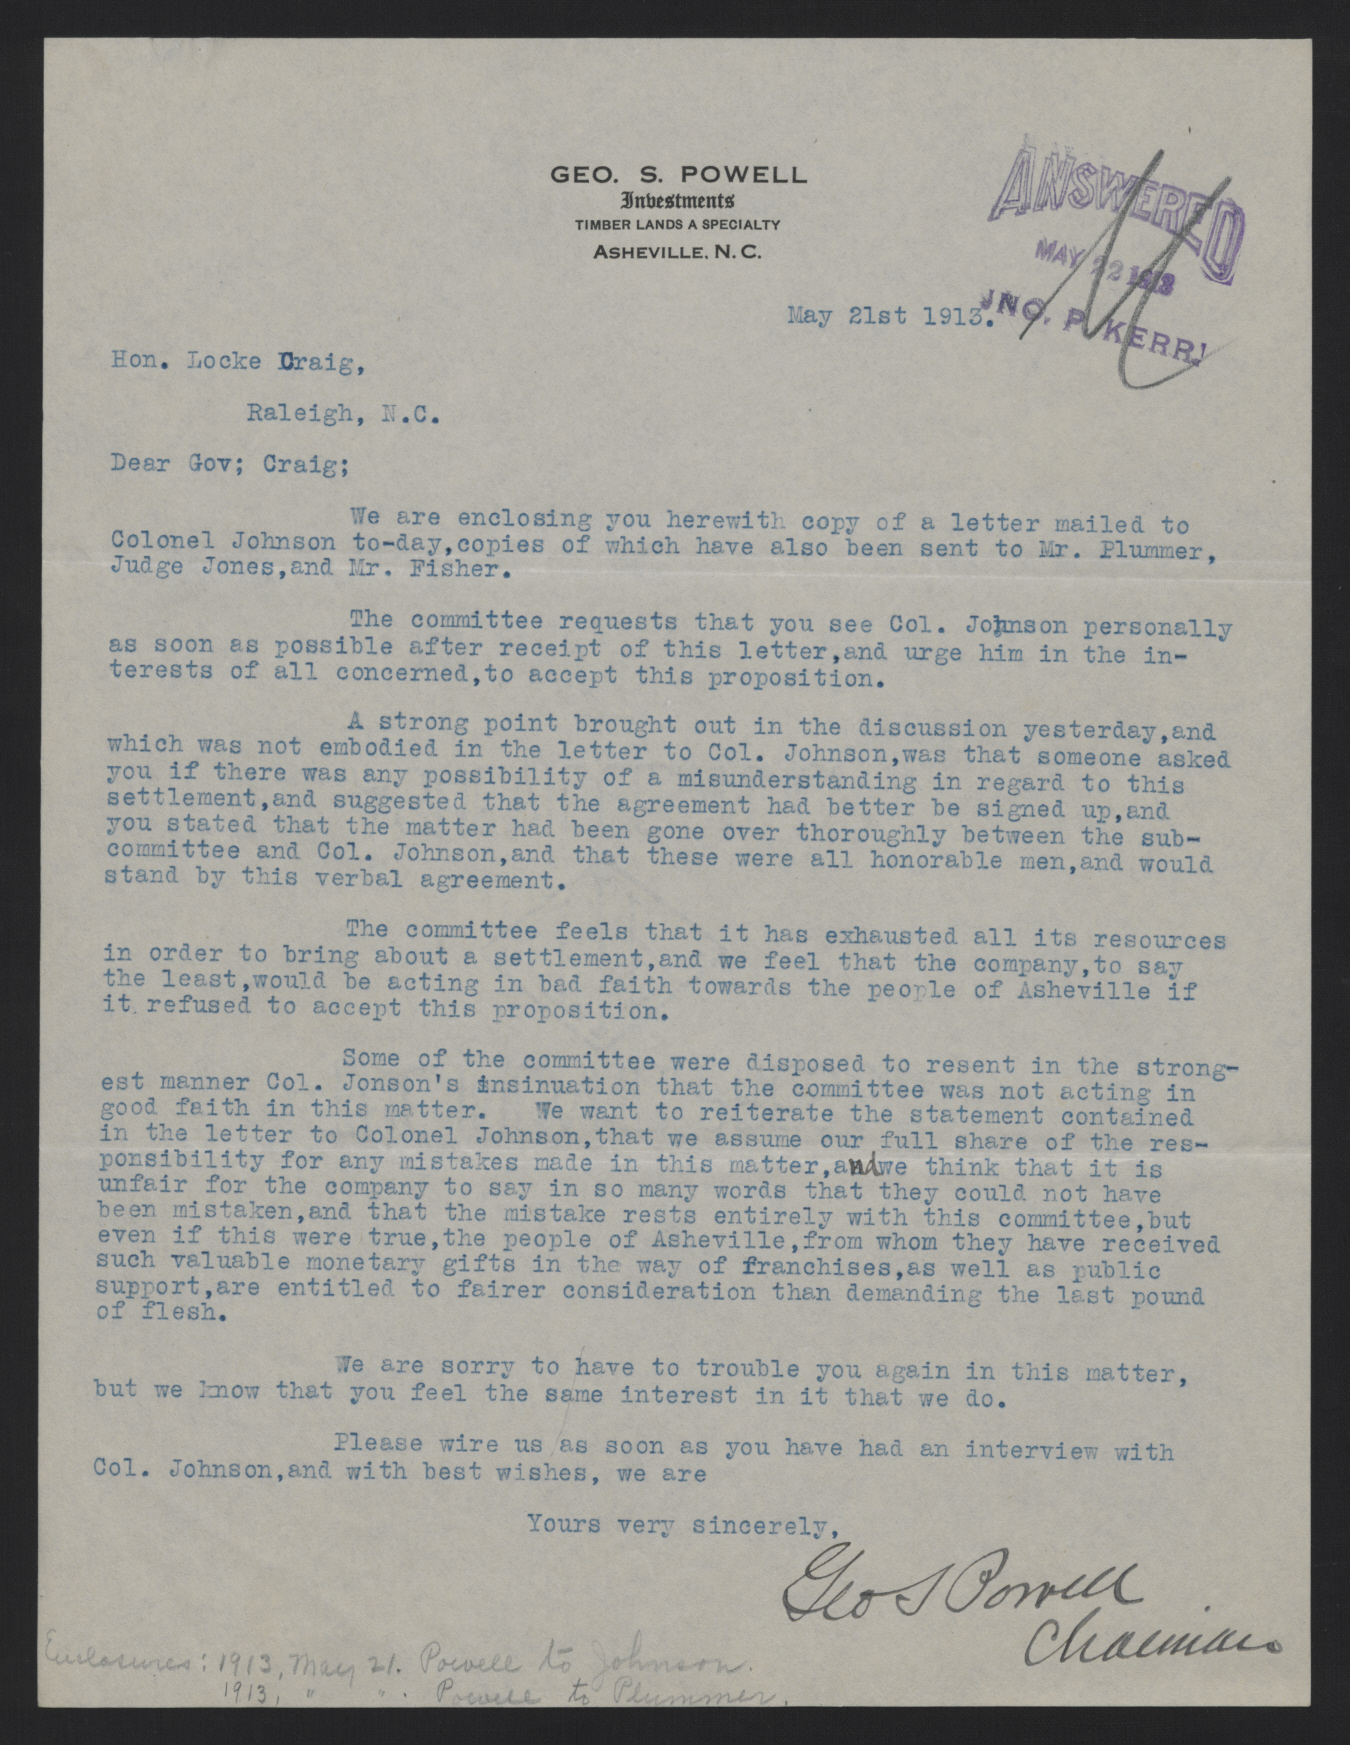 Letter from Powell to Craig, May 21, 1913